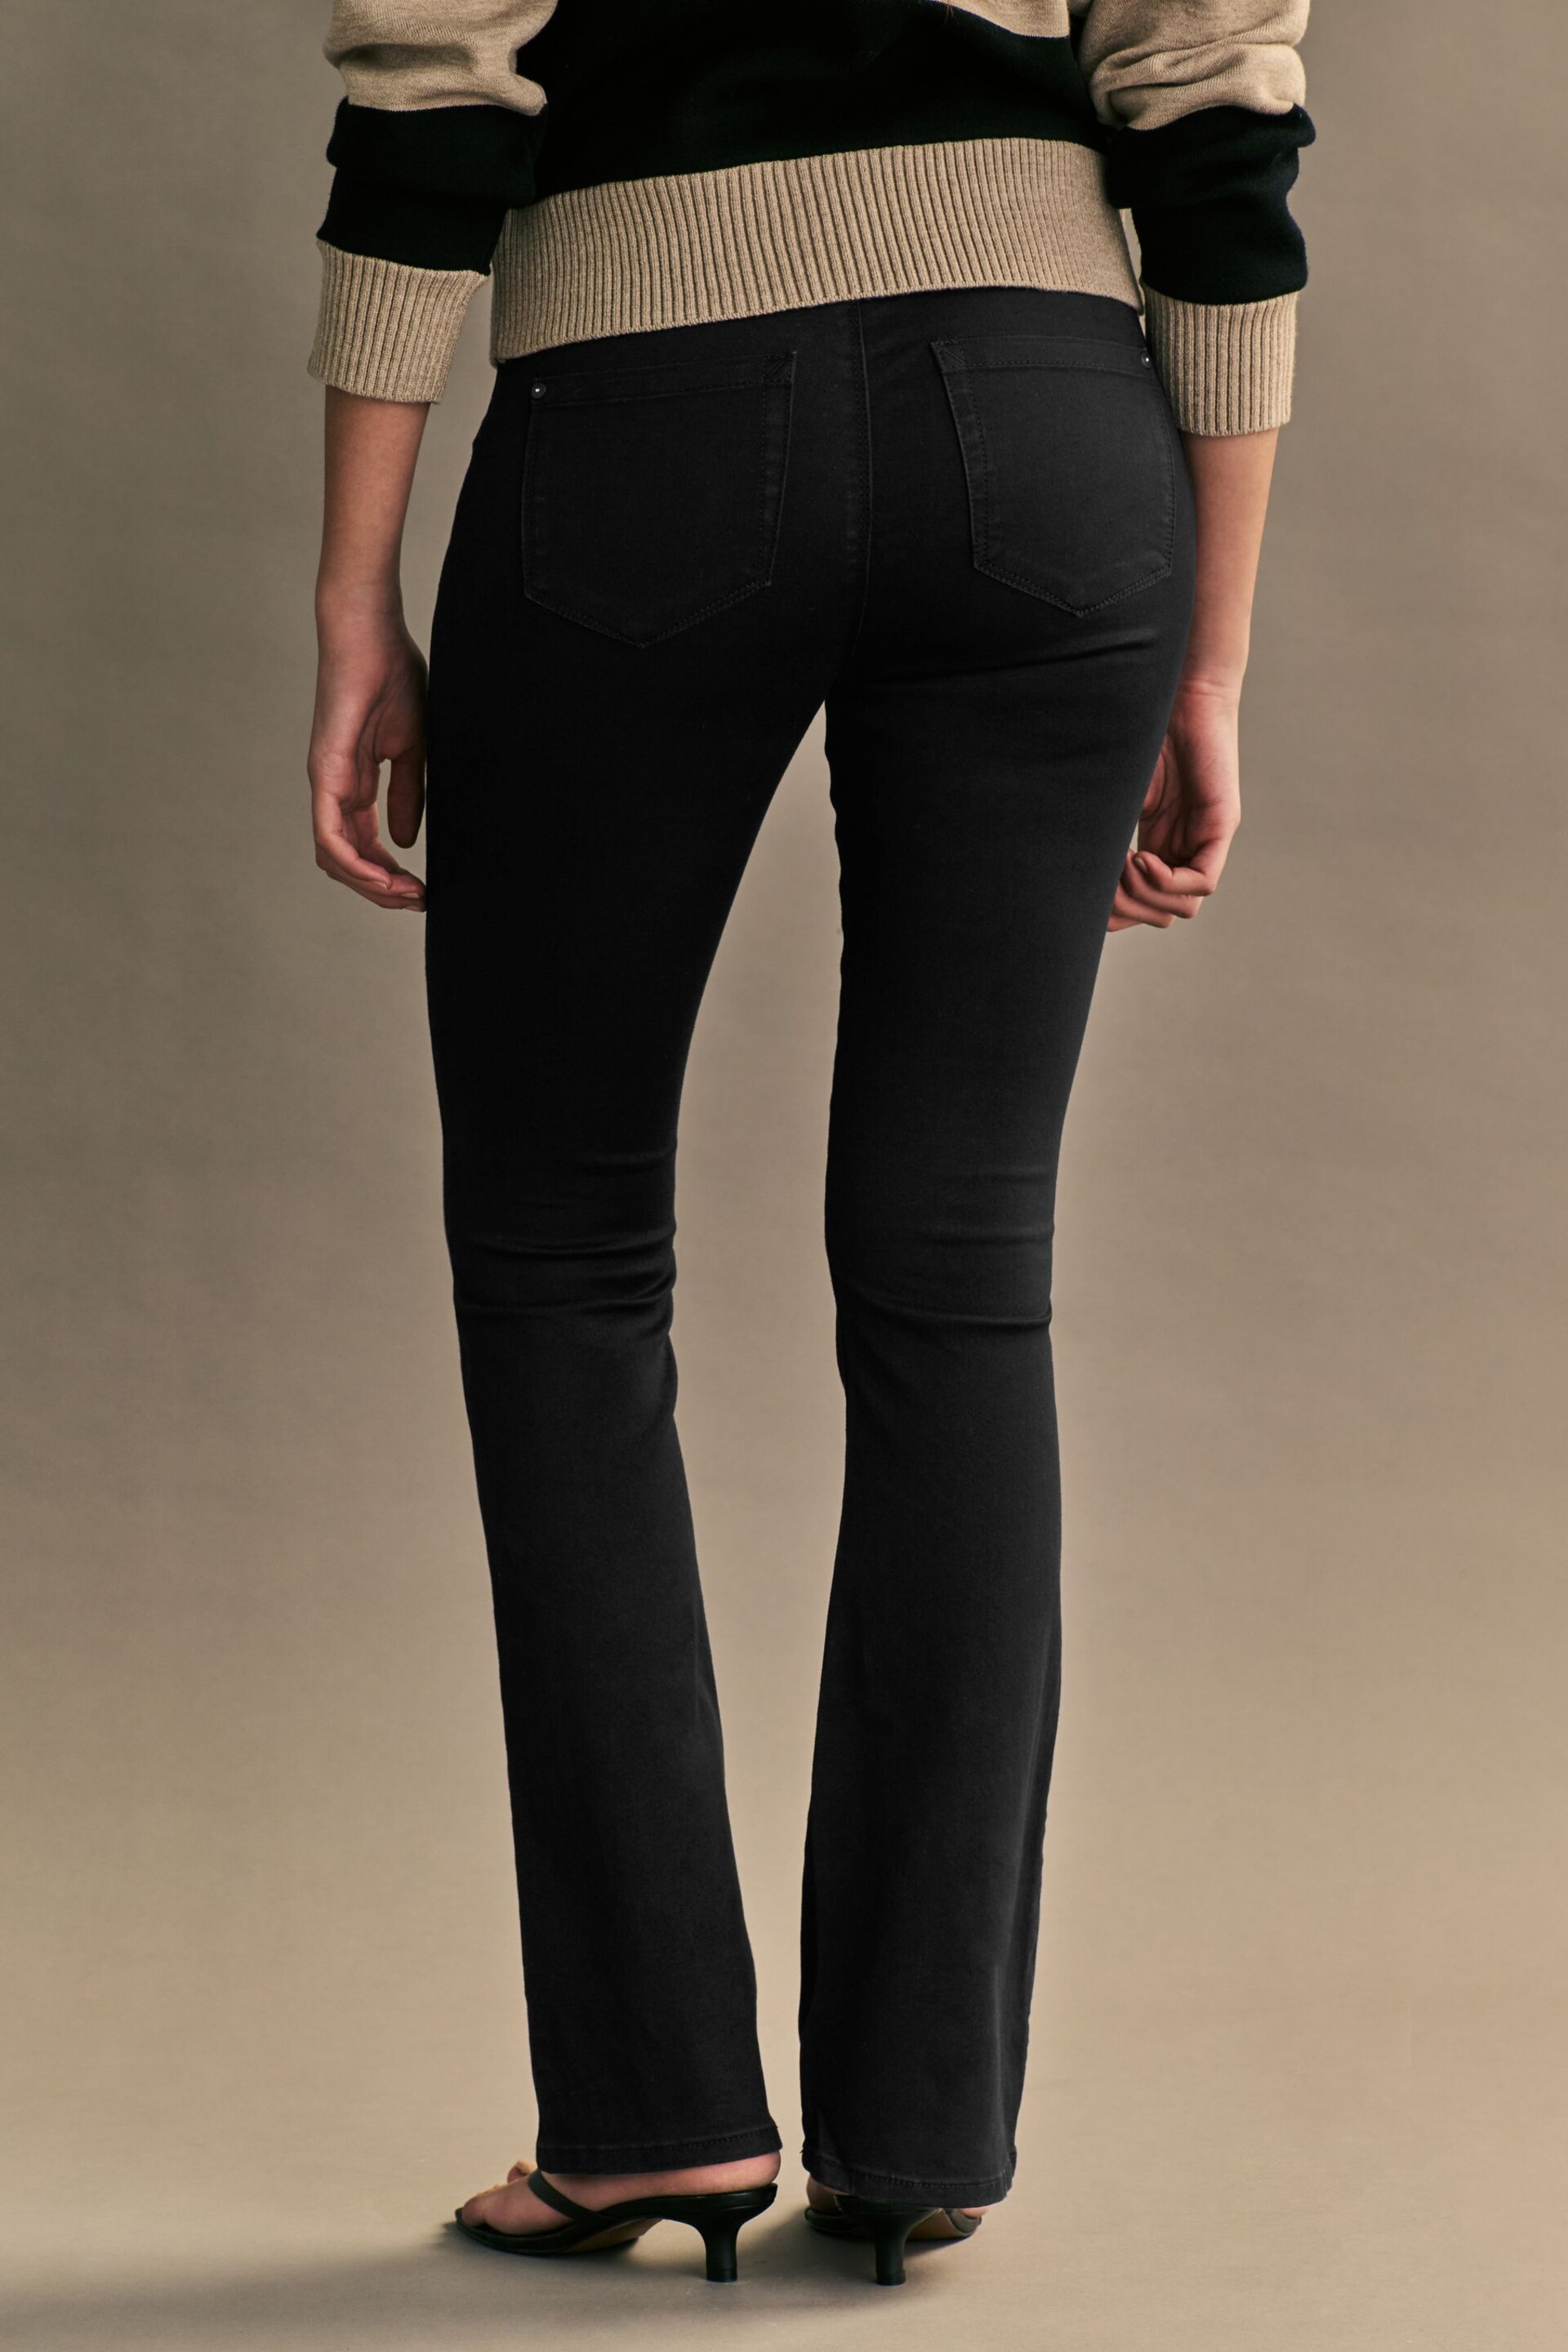 ONLY Black Petite High Waisted Stretch Flare Royal Jeans - Image 2 of 5